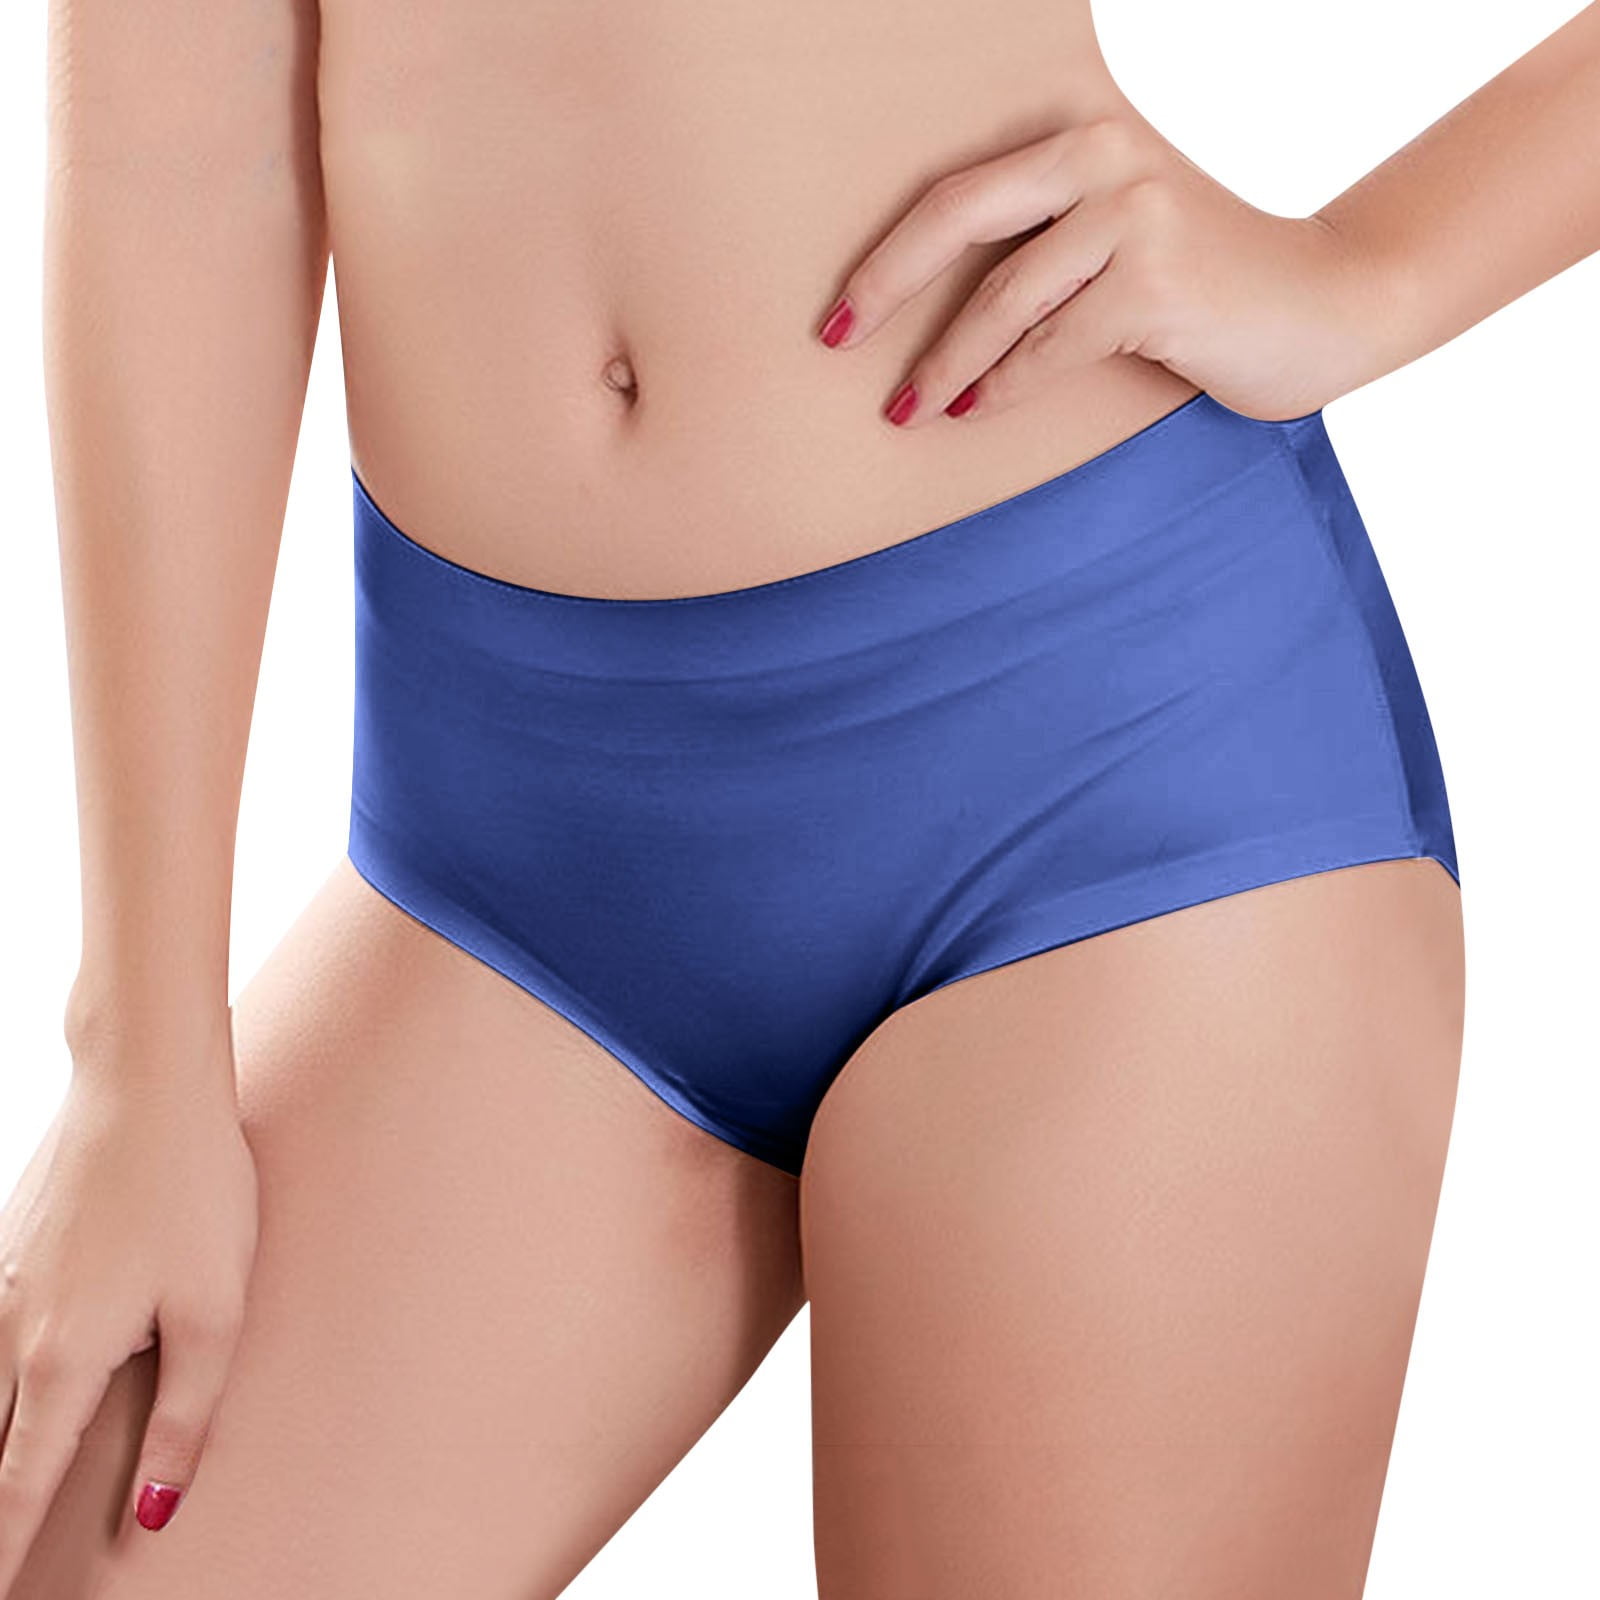 dmqupv Stash Underwear Ladies Plus Size Solid Color Womens Glossy Seamless  Stretch Womens Boy Shorts Underwear Underpants Blue XX-Large